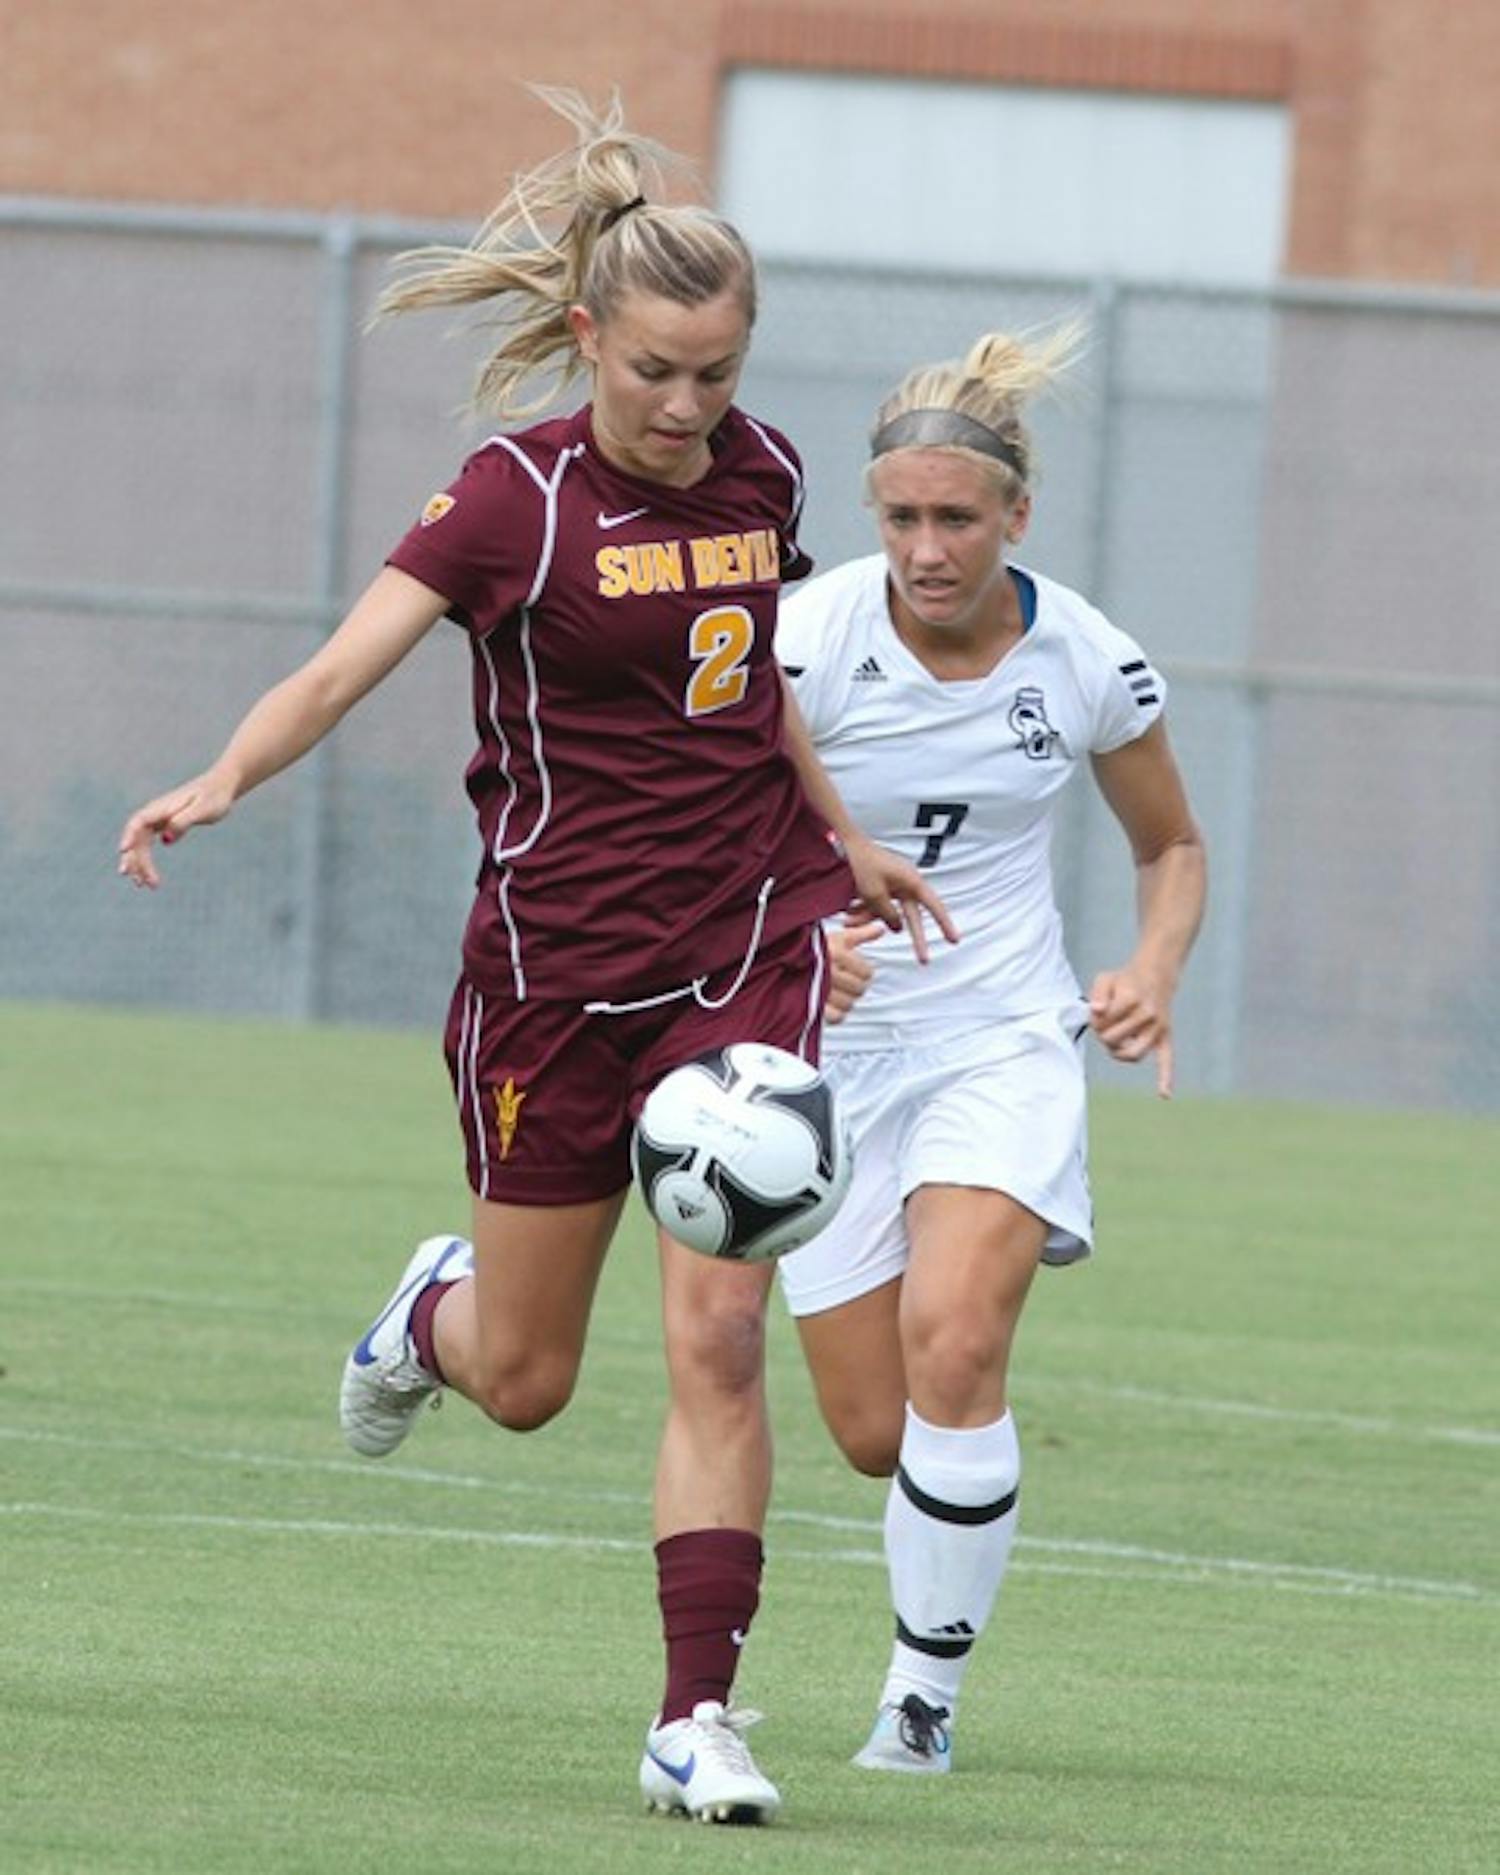 BOUNCE BACK: ASU freshman forward Alexandra Doller gets set to kick the ball away from Old Dominion senior defender Rachael Carroll on Sunday. The Sun Devils fell to 2-2 after losing to both the Monarchs and No. 4 Virginia on the first road trip of the season. (Photo courtesy of Steve Rodriguez)